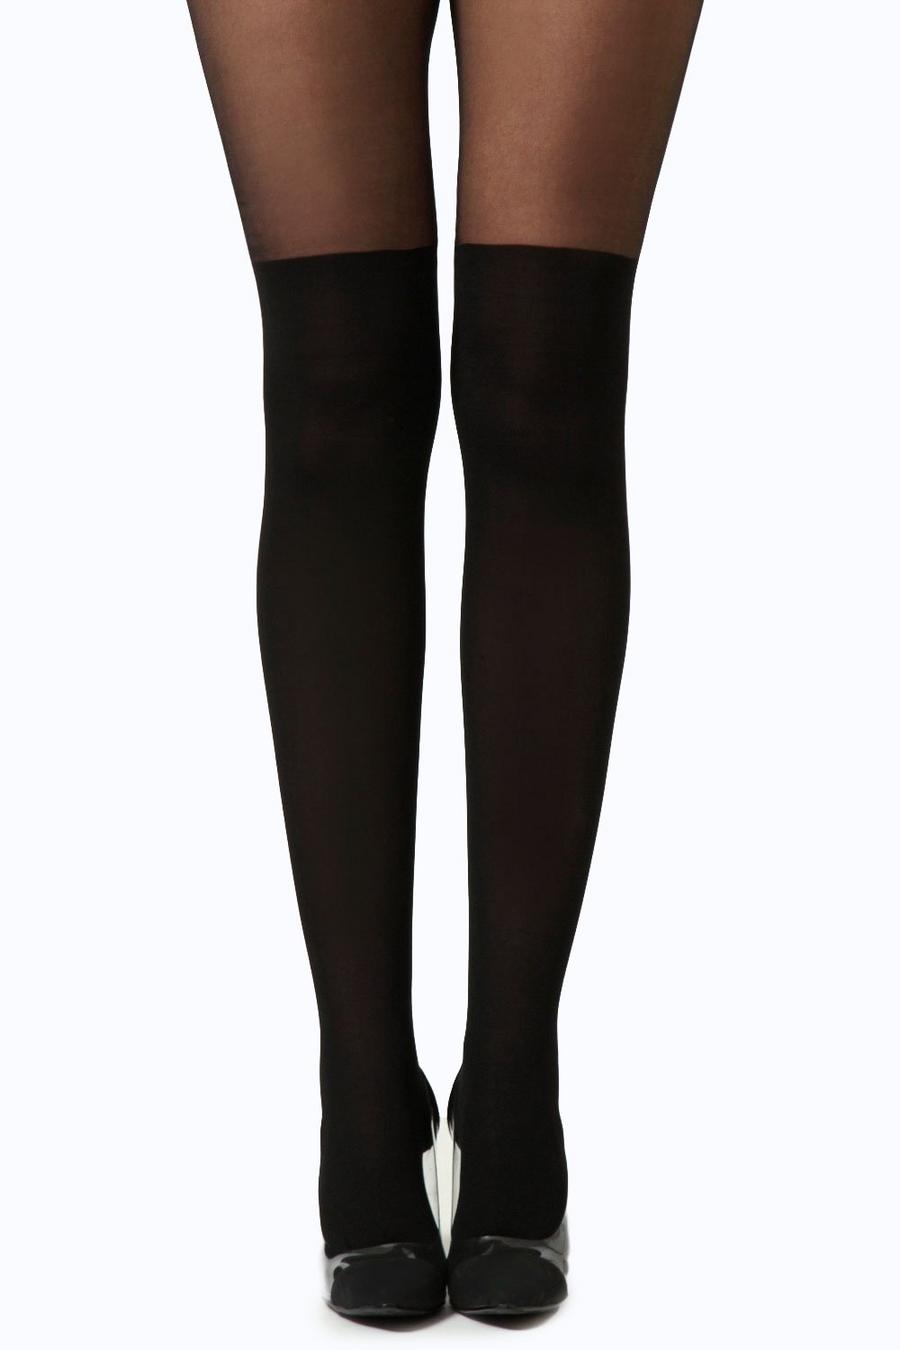 Over Knee Tights